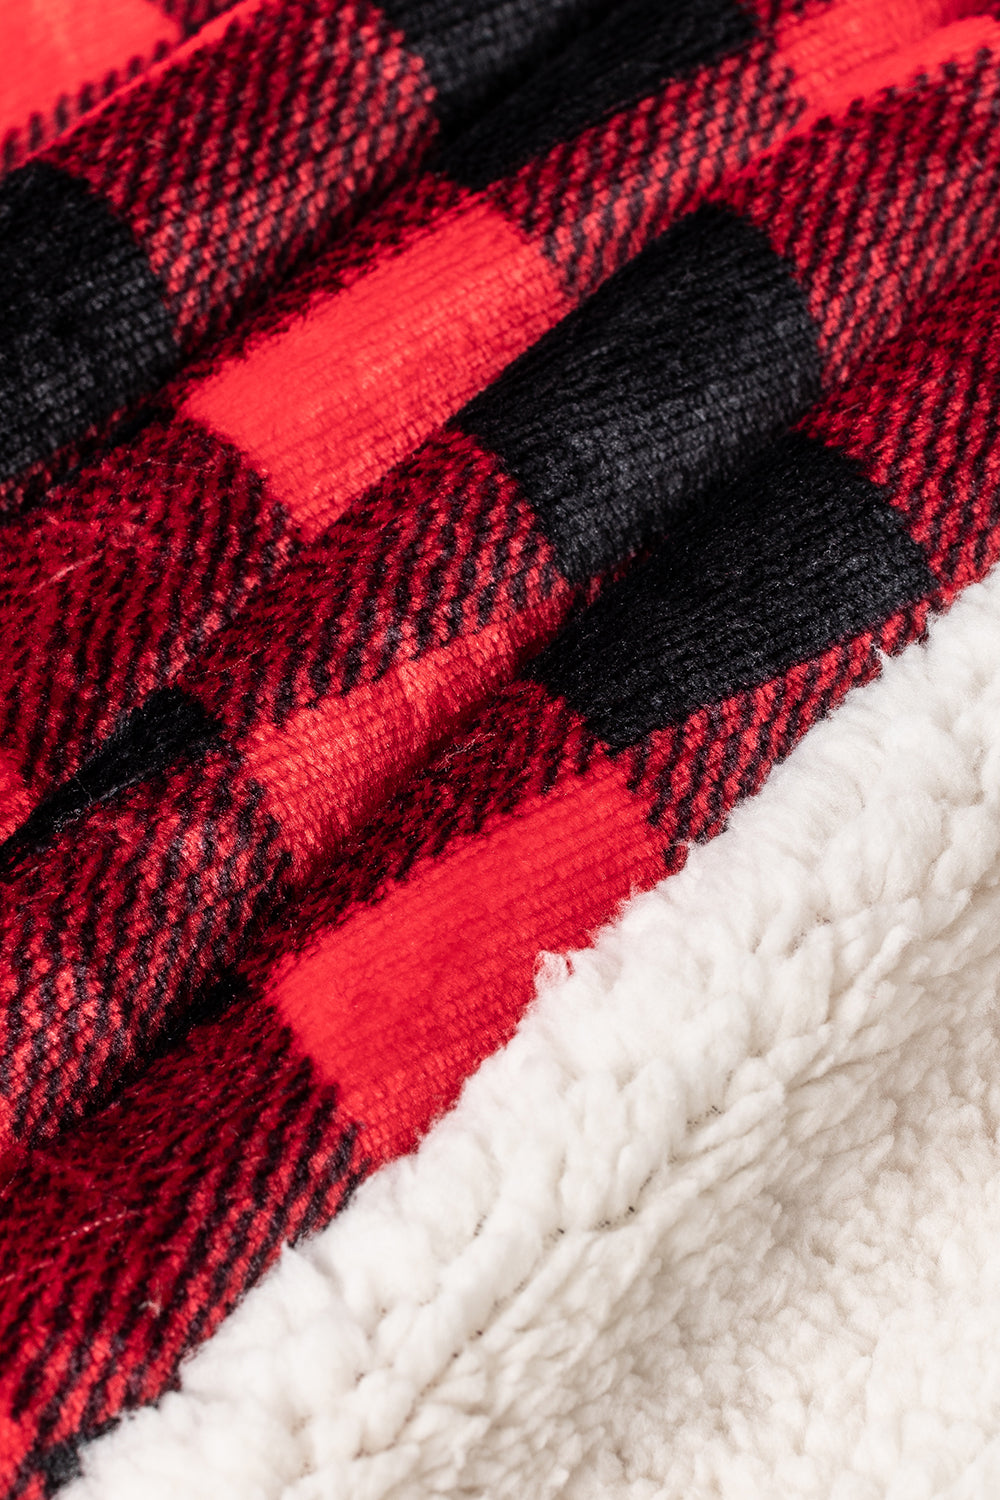 just cozy, Bedding, Just Cozy Sherpa Blanket